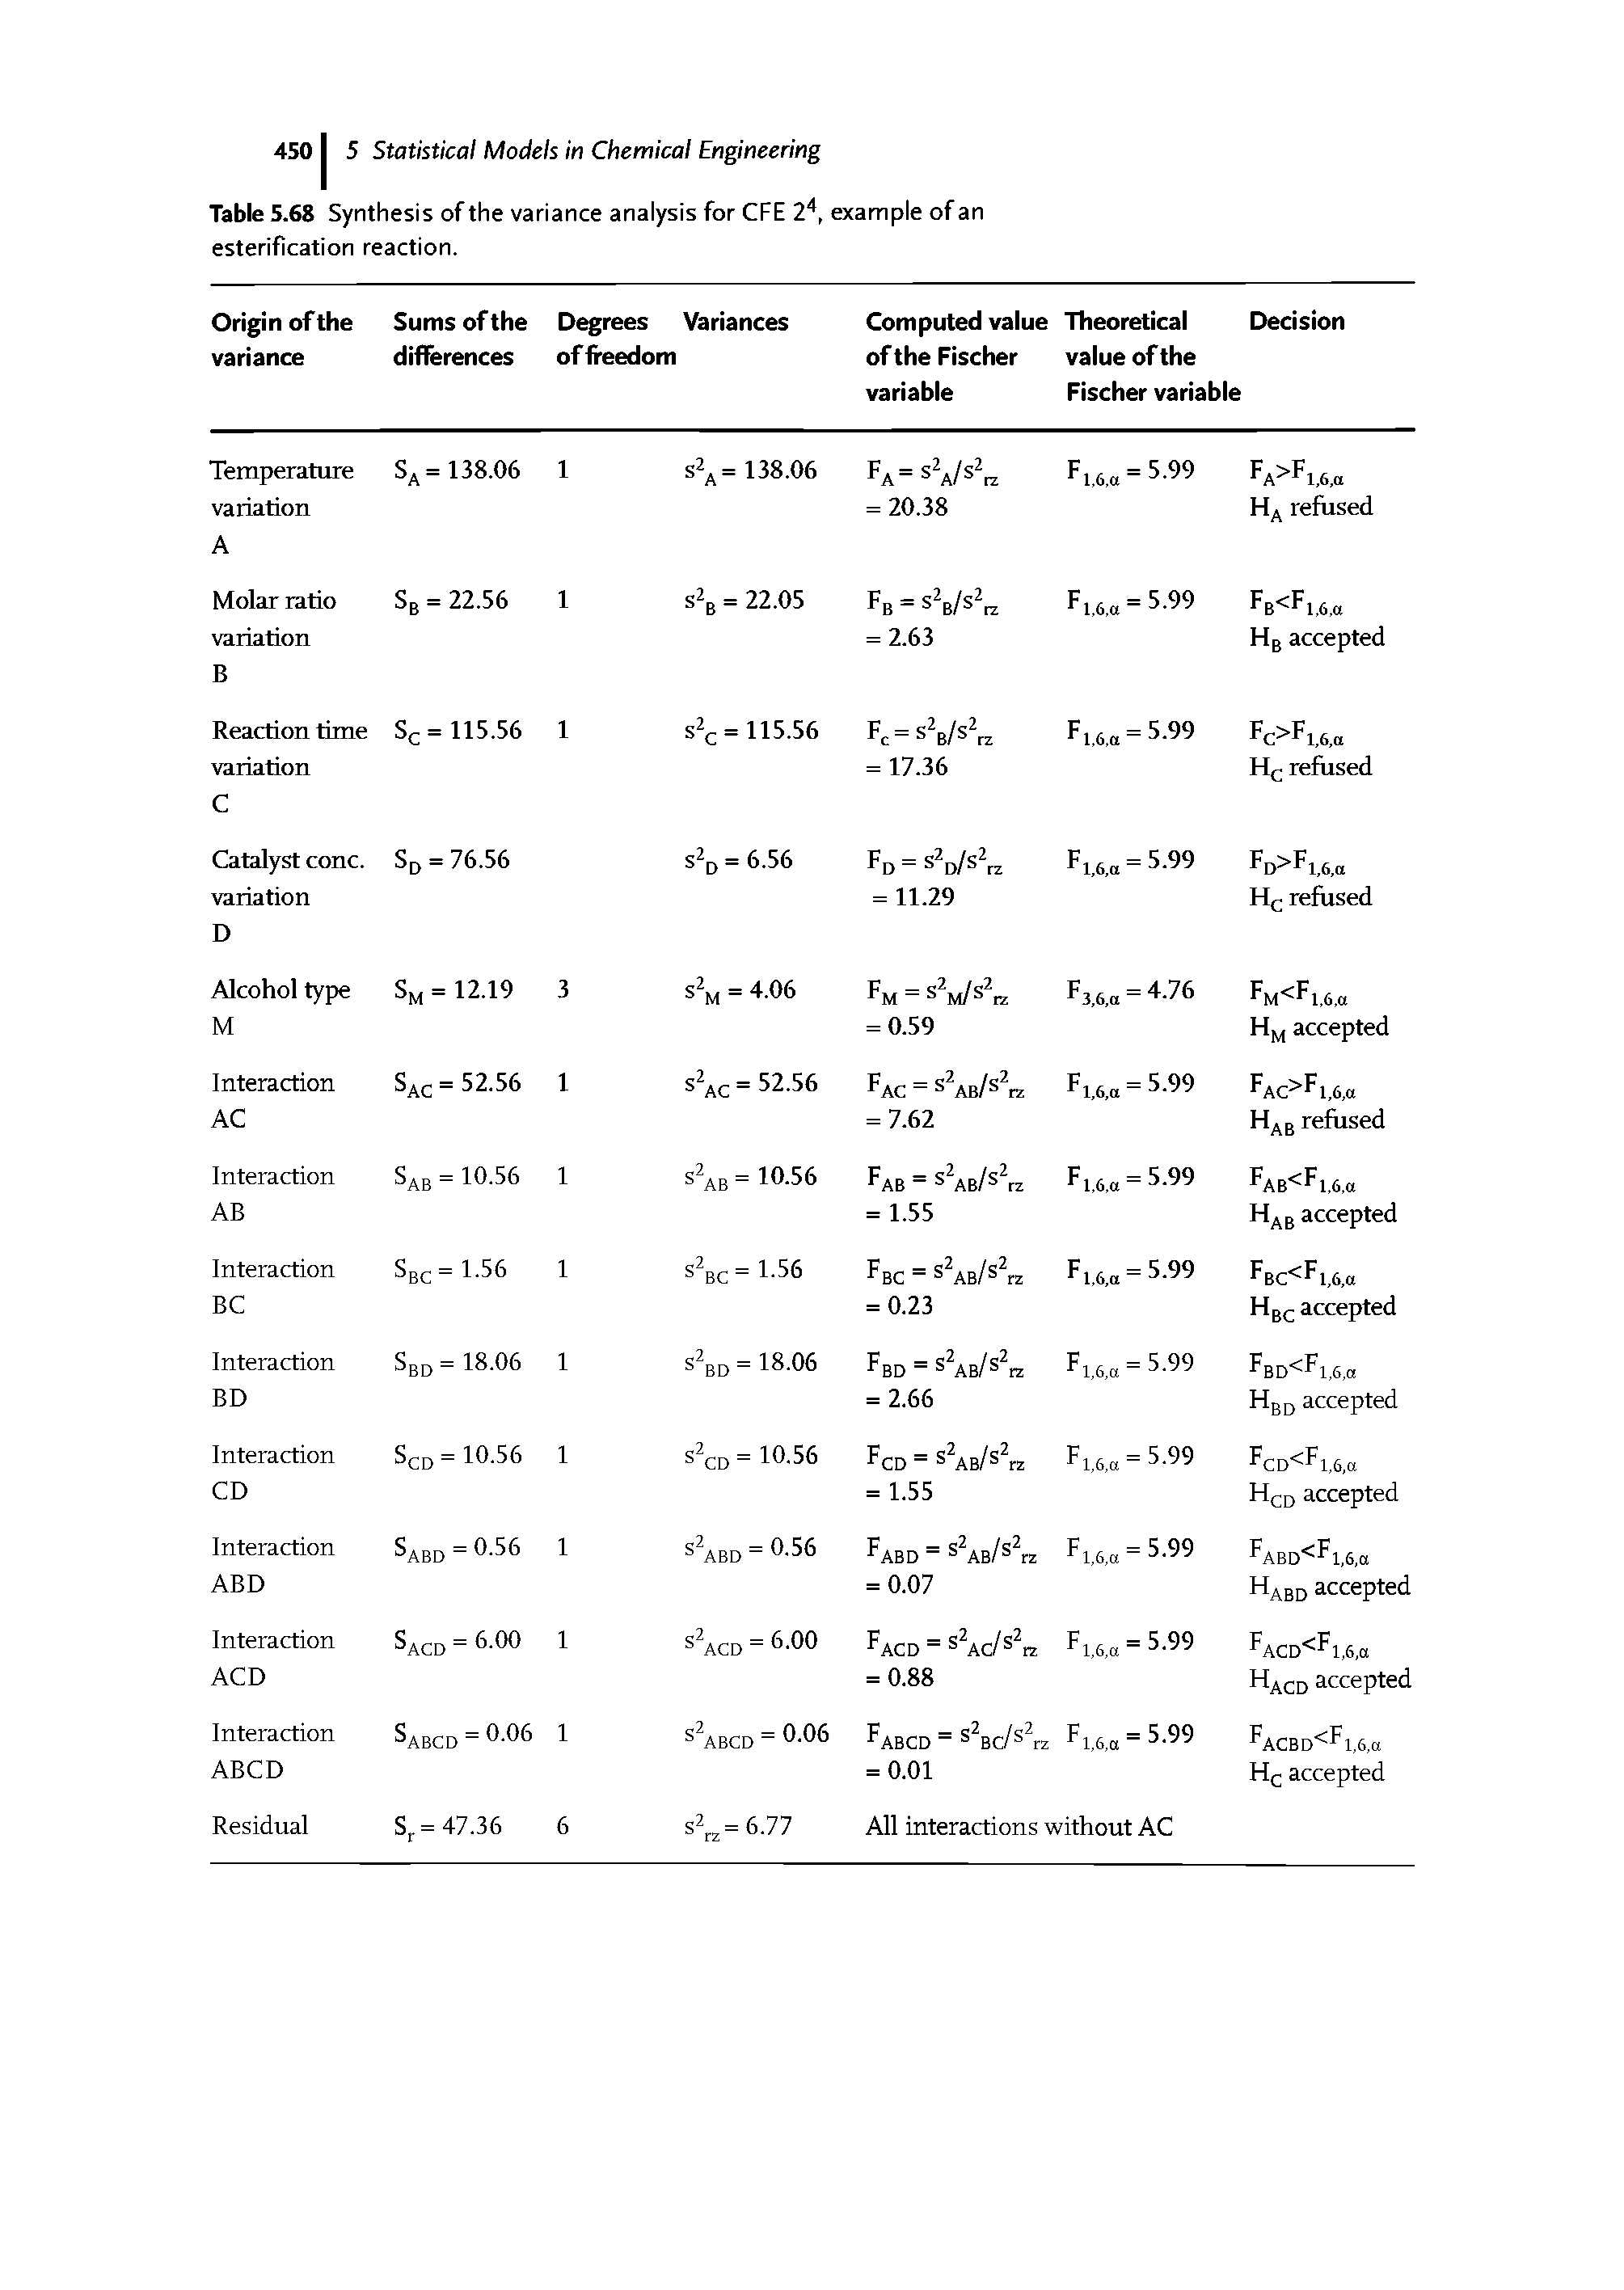 Table 5.68 Synthesis of the variance anaiysis for CFE 2, exampie of an esterification reaction.